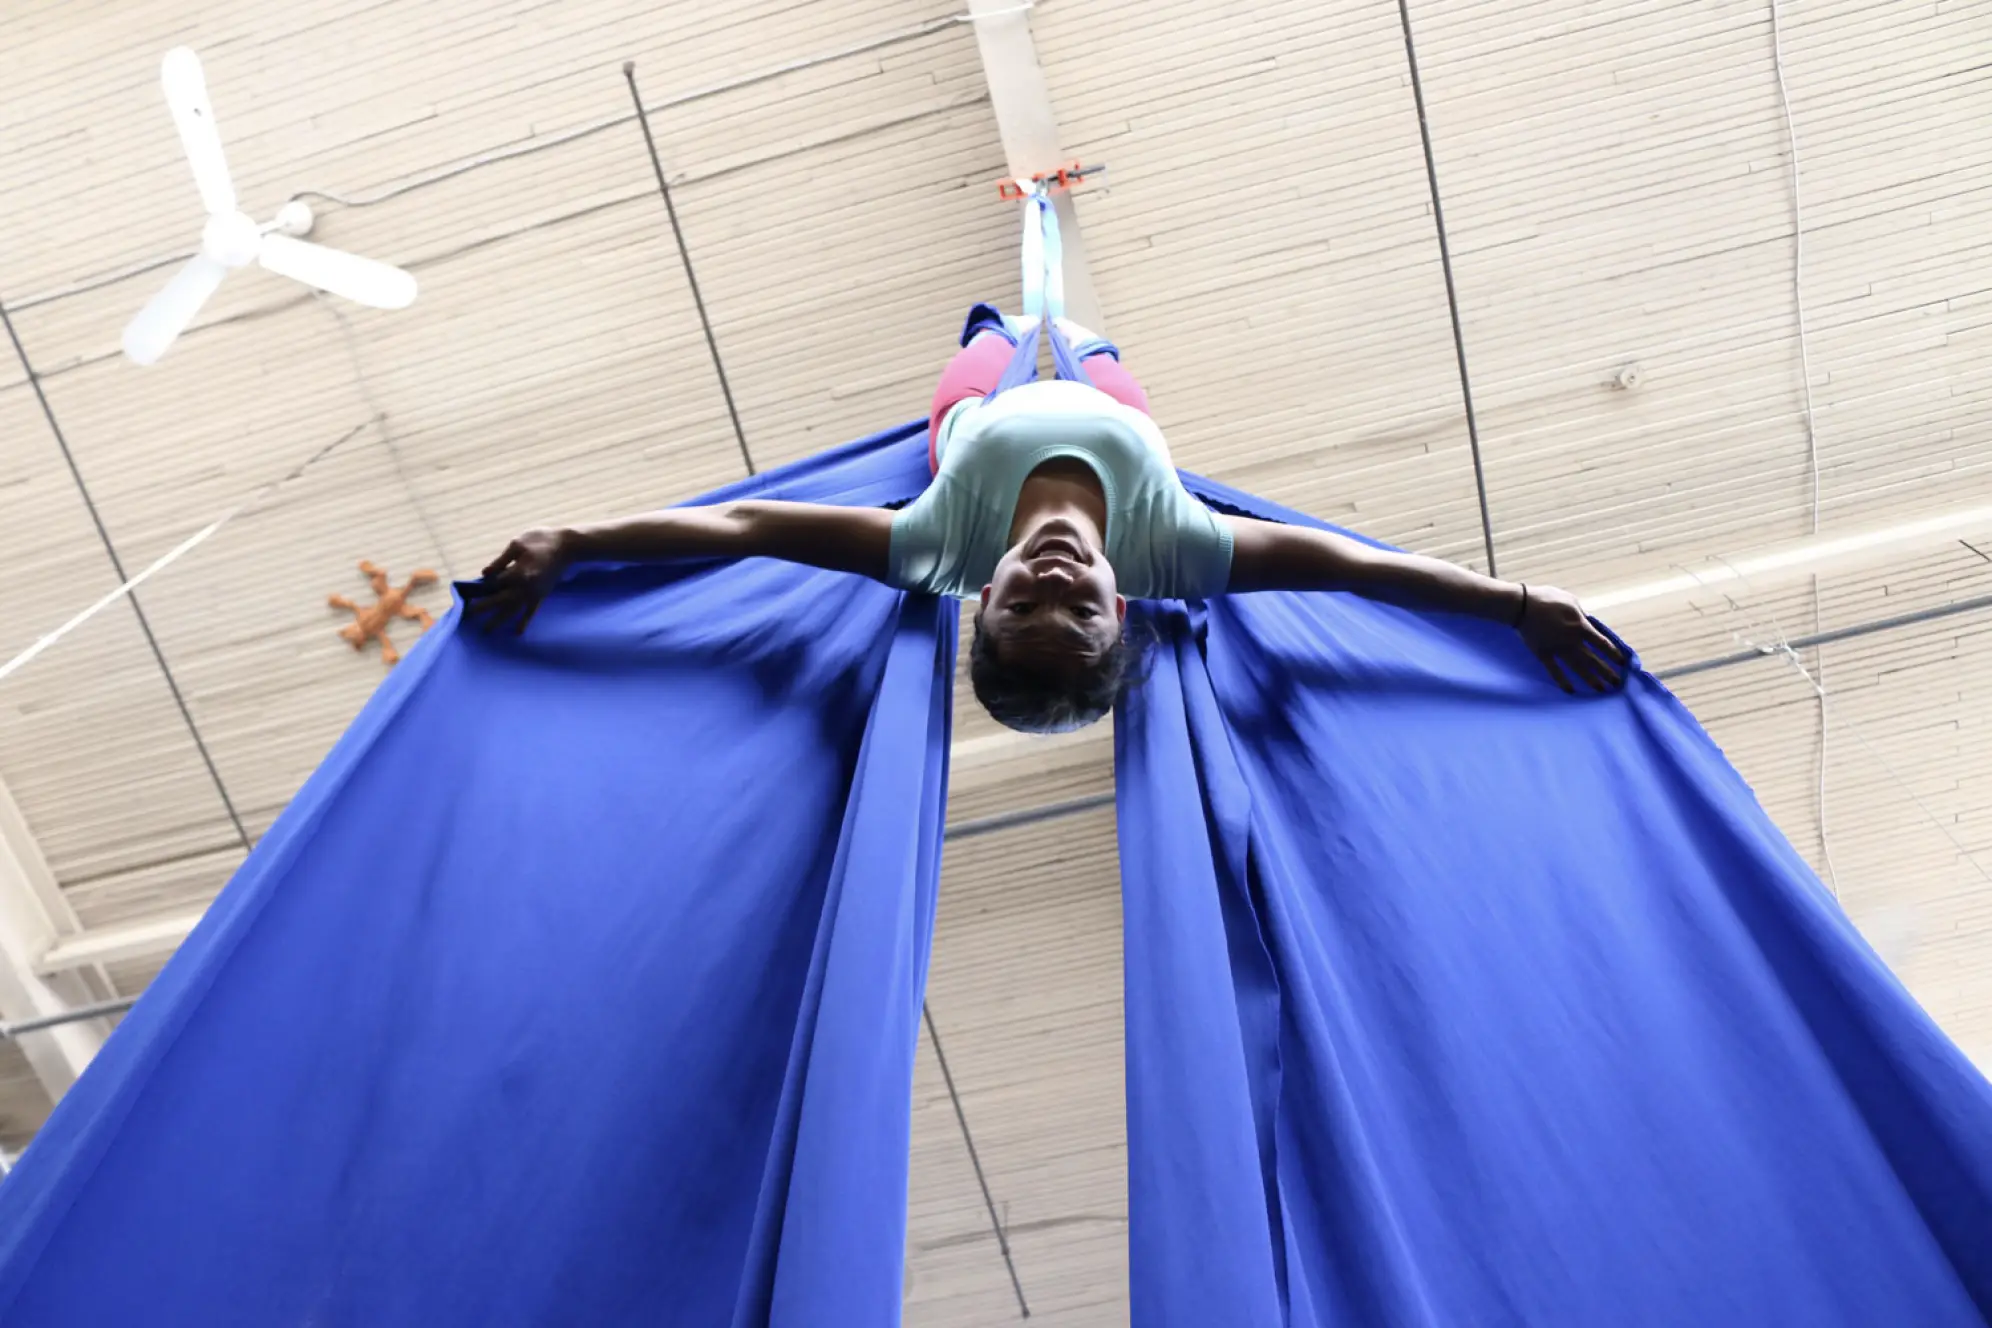 Aerial artist hanging upside down in blue silks and looking at camera